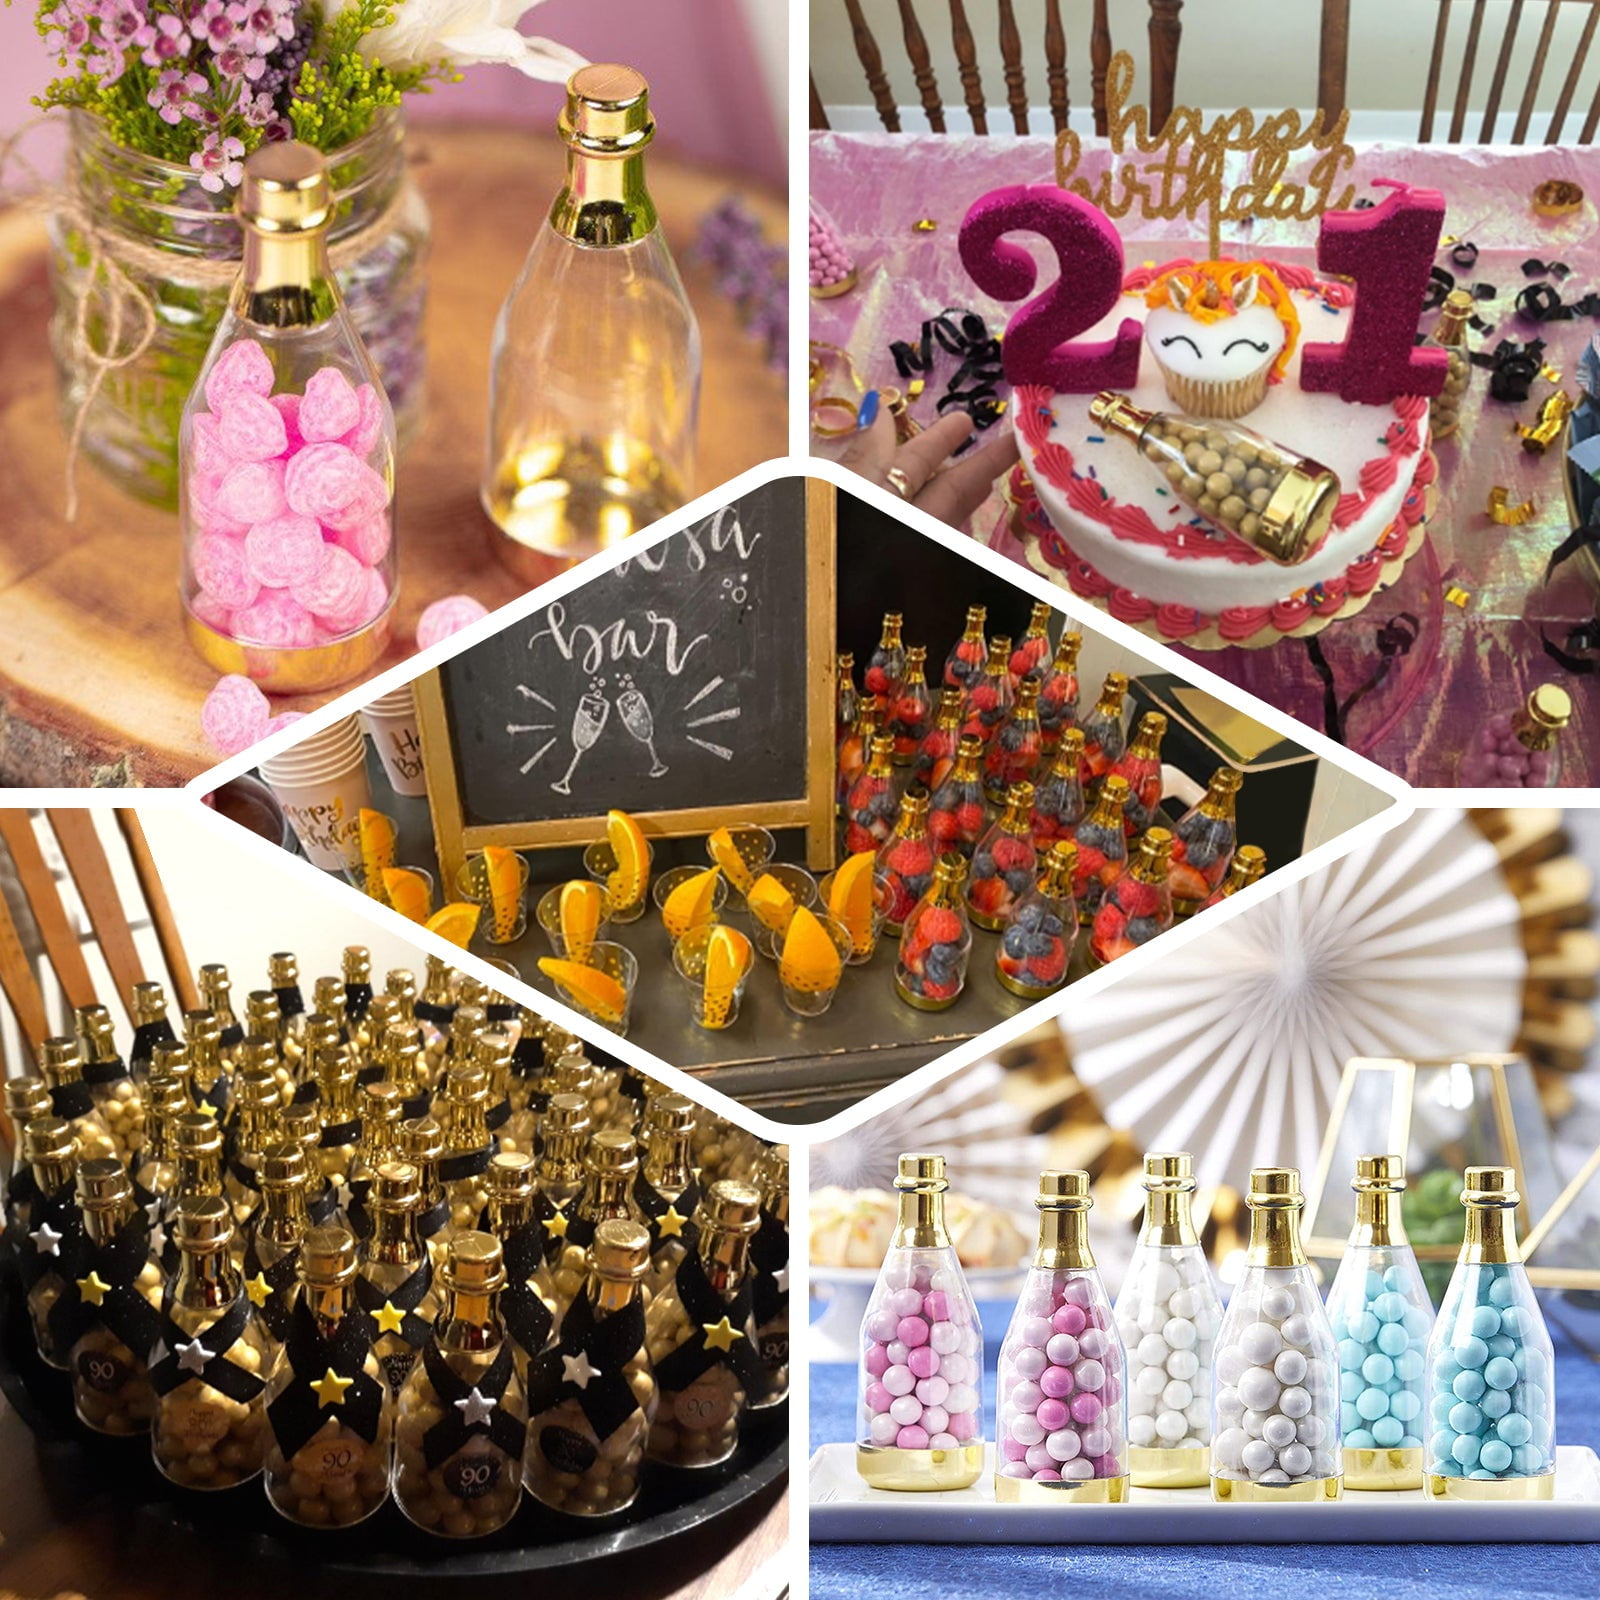 ifundom 24 Pcs Candy Box Gold Crown Centerpieces for Tables Fillable Golden  Crown Candy Containers Table Centerpieces Bath Gifts Party Favor